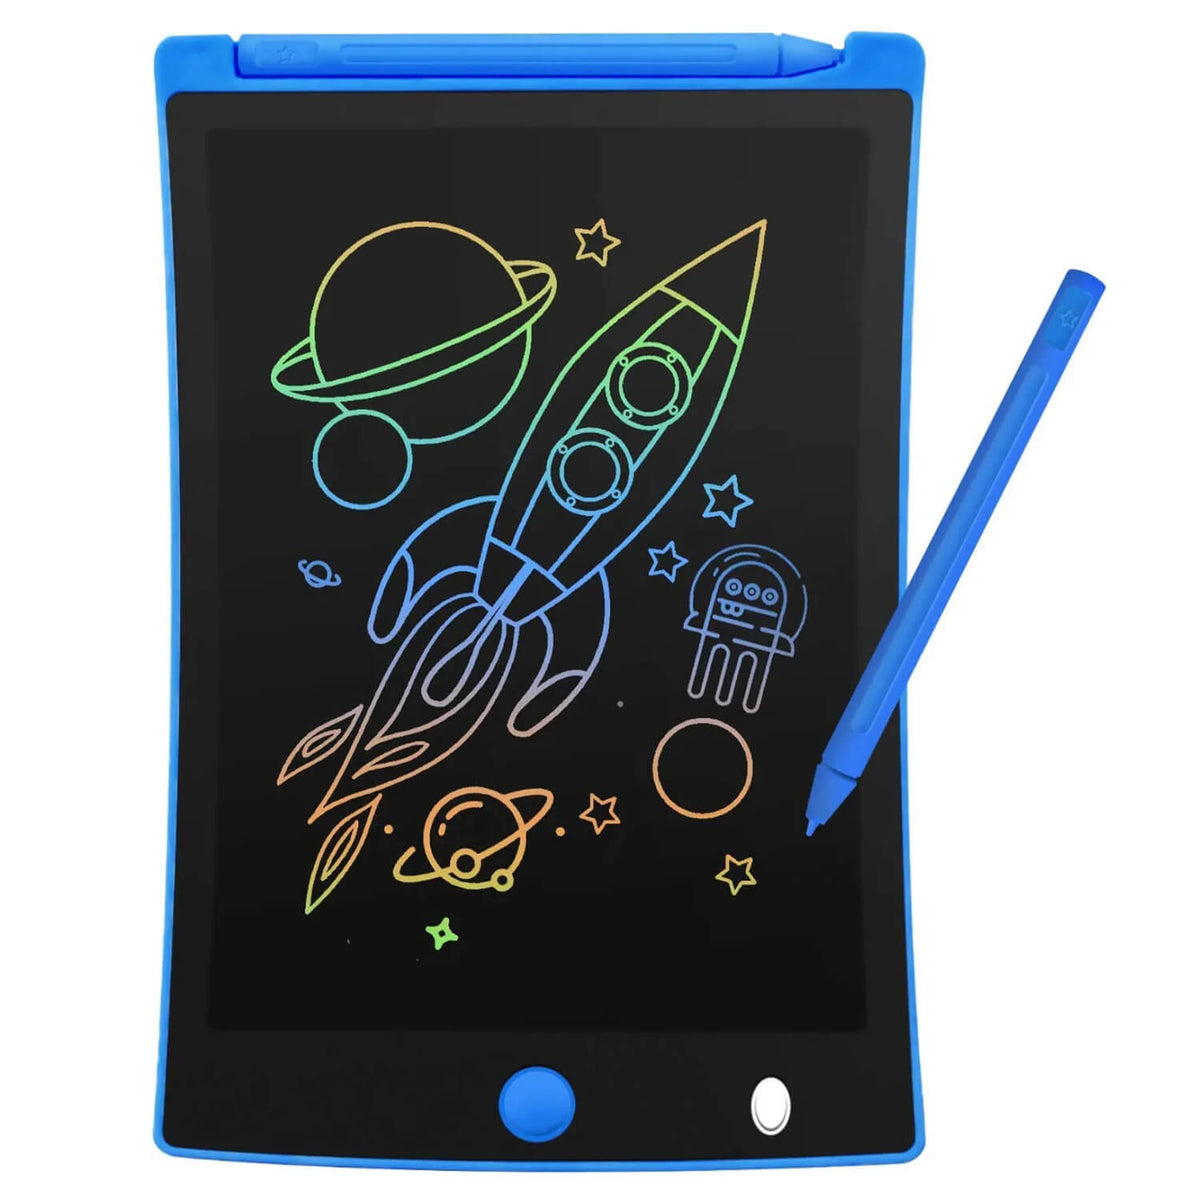 ORSEN Colorful 8.5 Inch LCD Writing Tablet for Kids, Electronic Sketch Drawing Pad Doodle Board